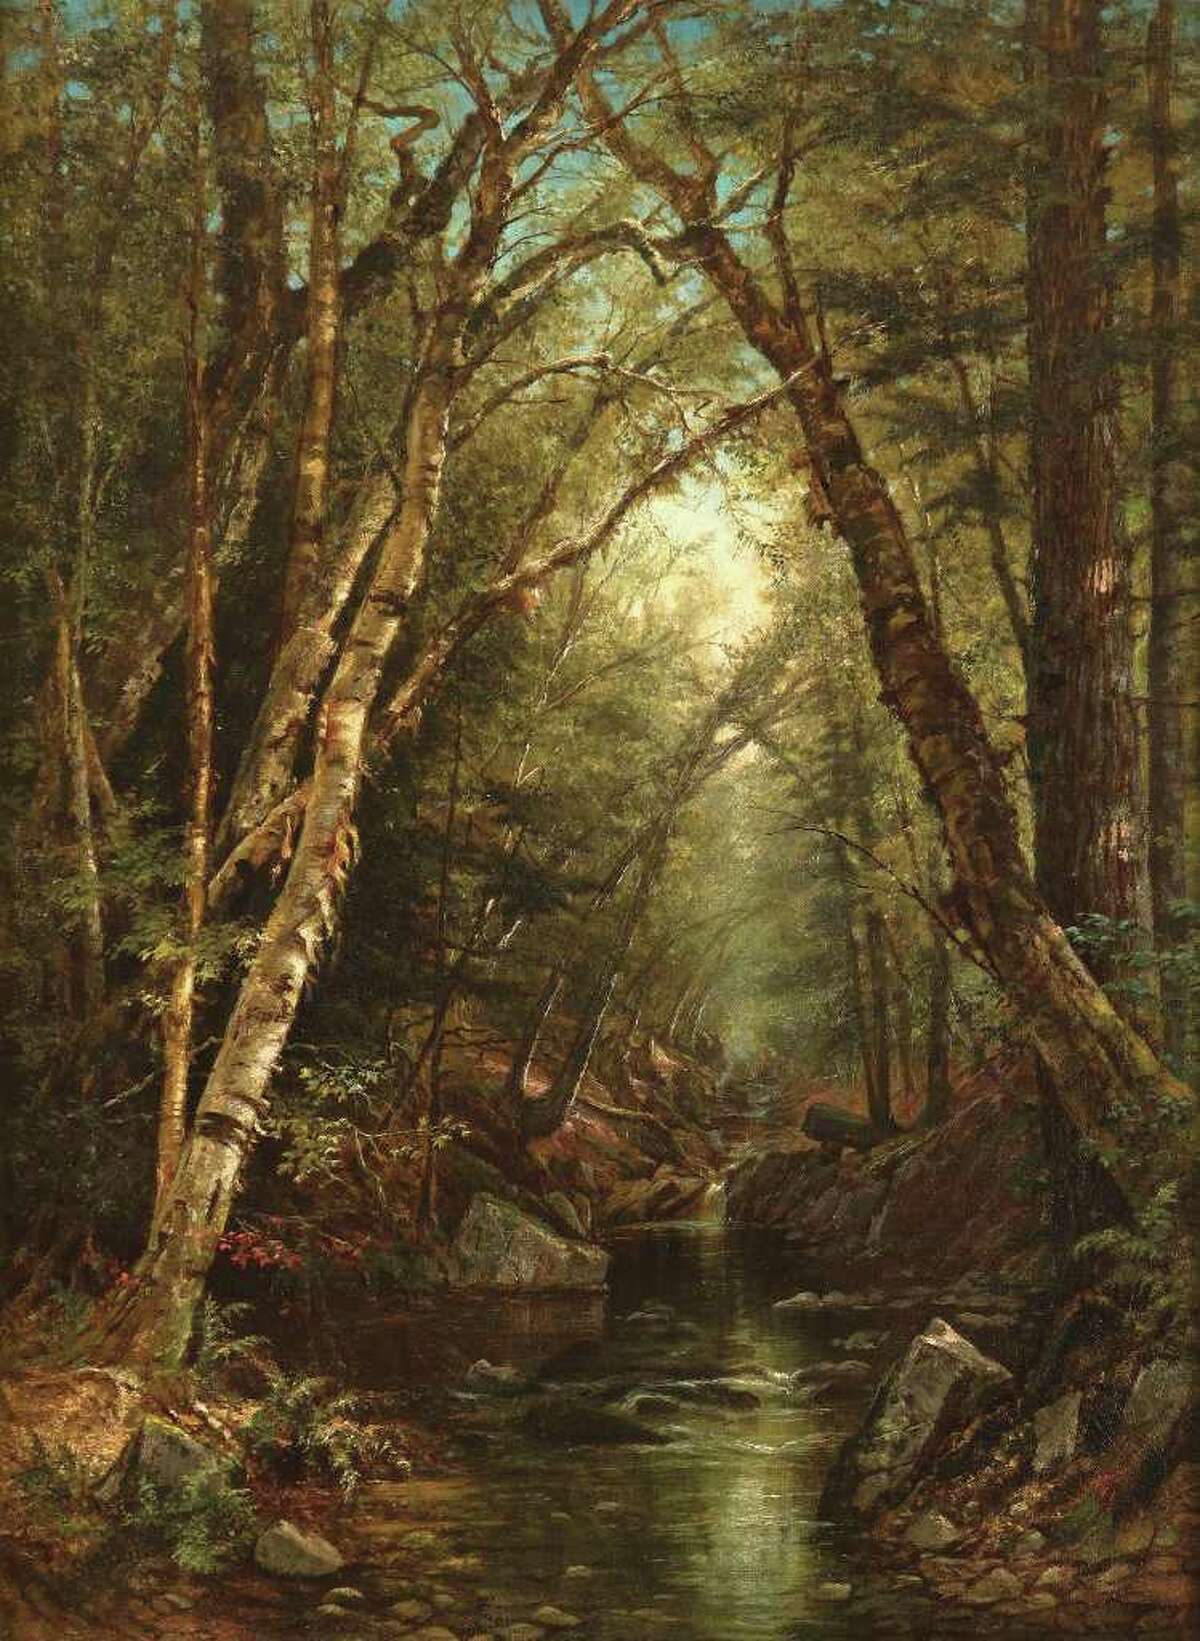 Mary Josephine Walters (1837?1883) "Forest Interior" Oil on canvas, 8 x 6 in. Collection of Nicholas V. Bulzacchelli